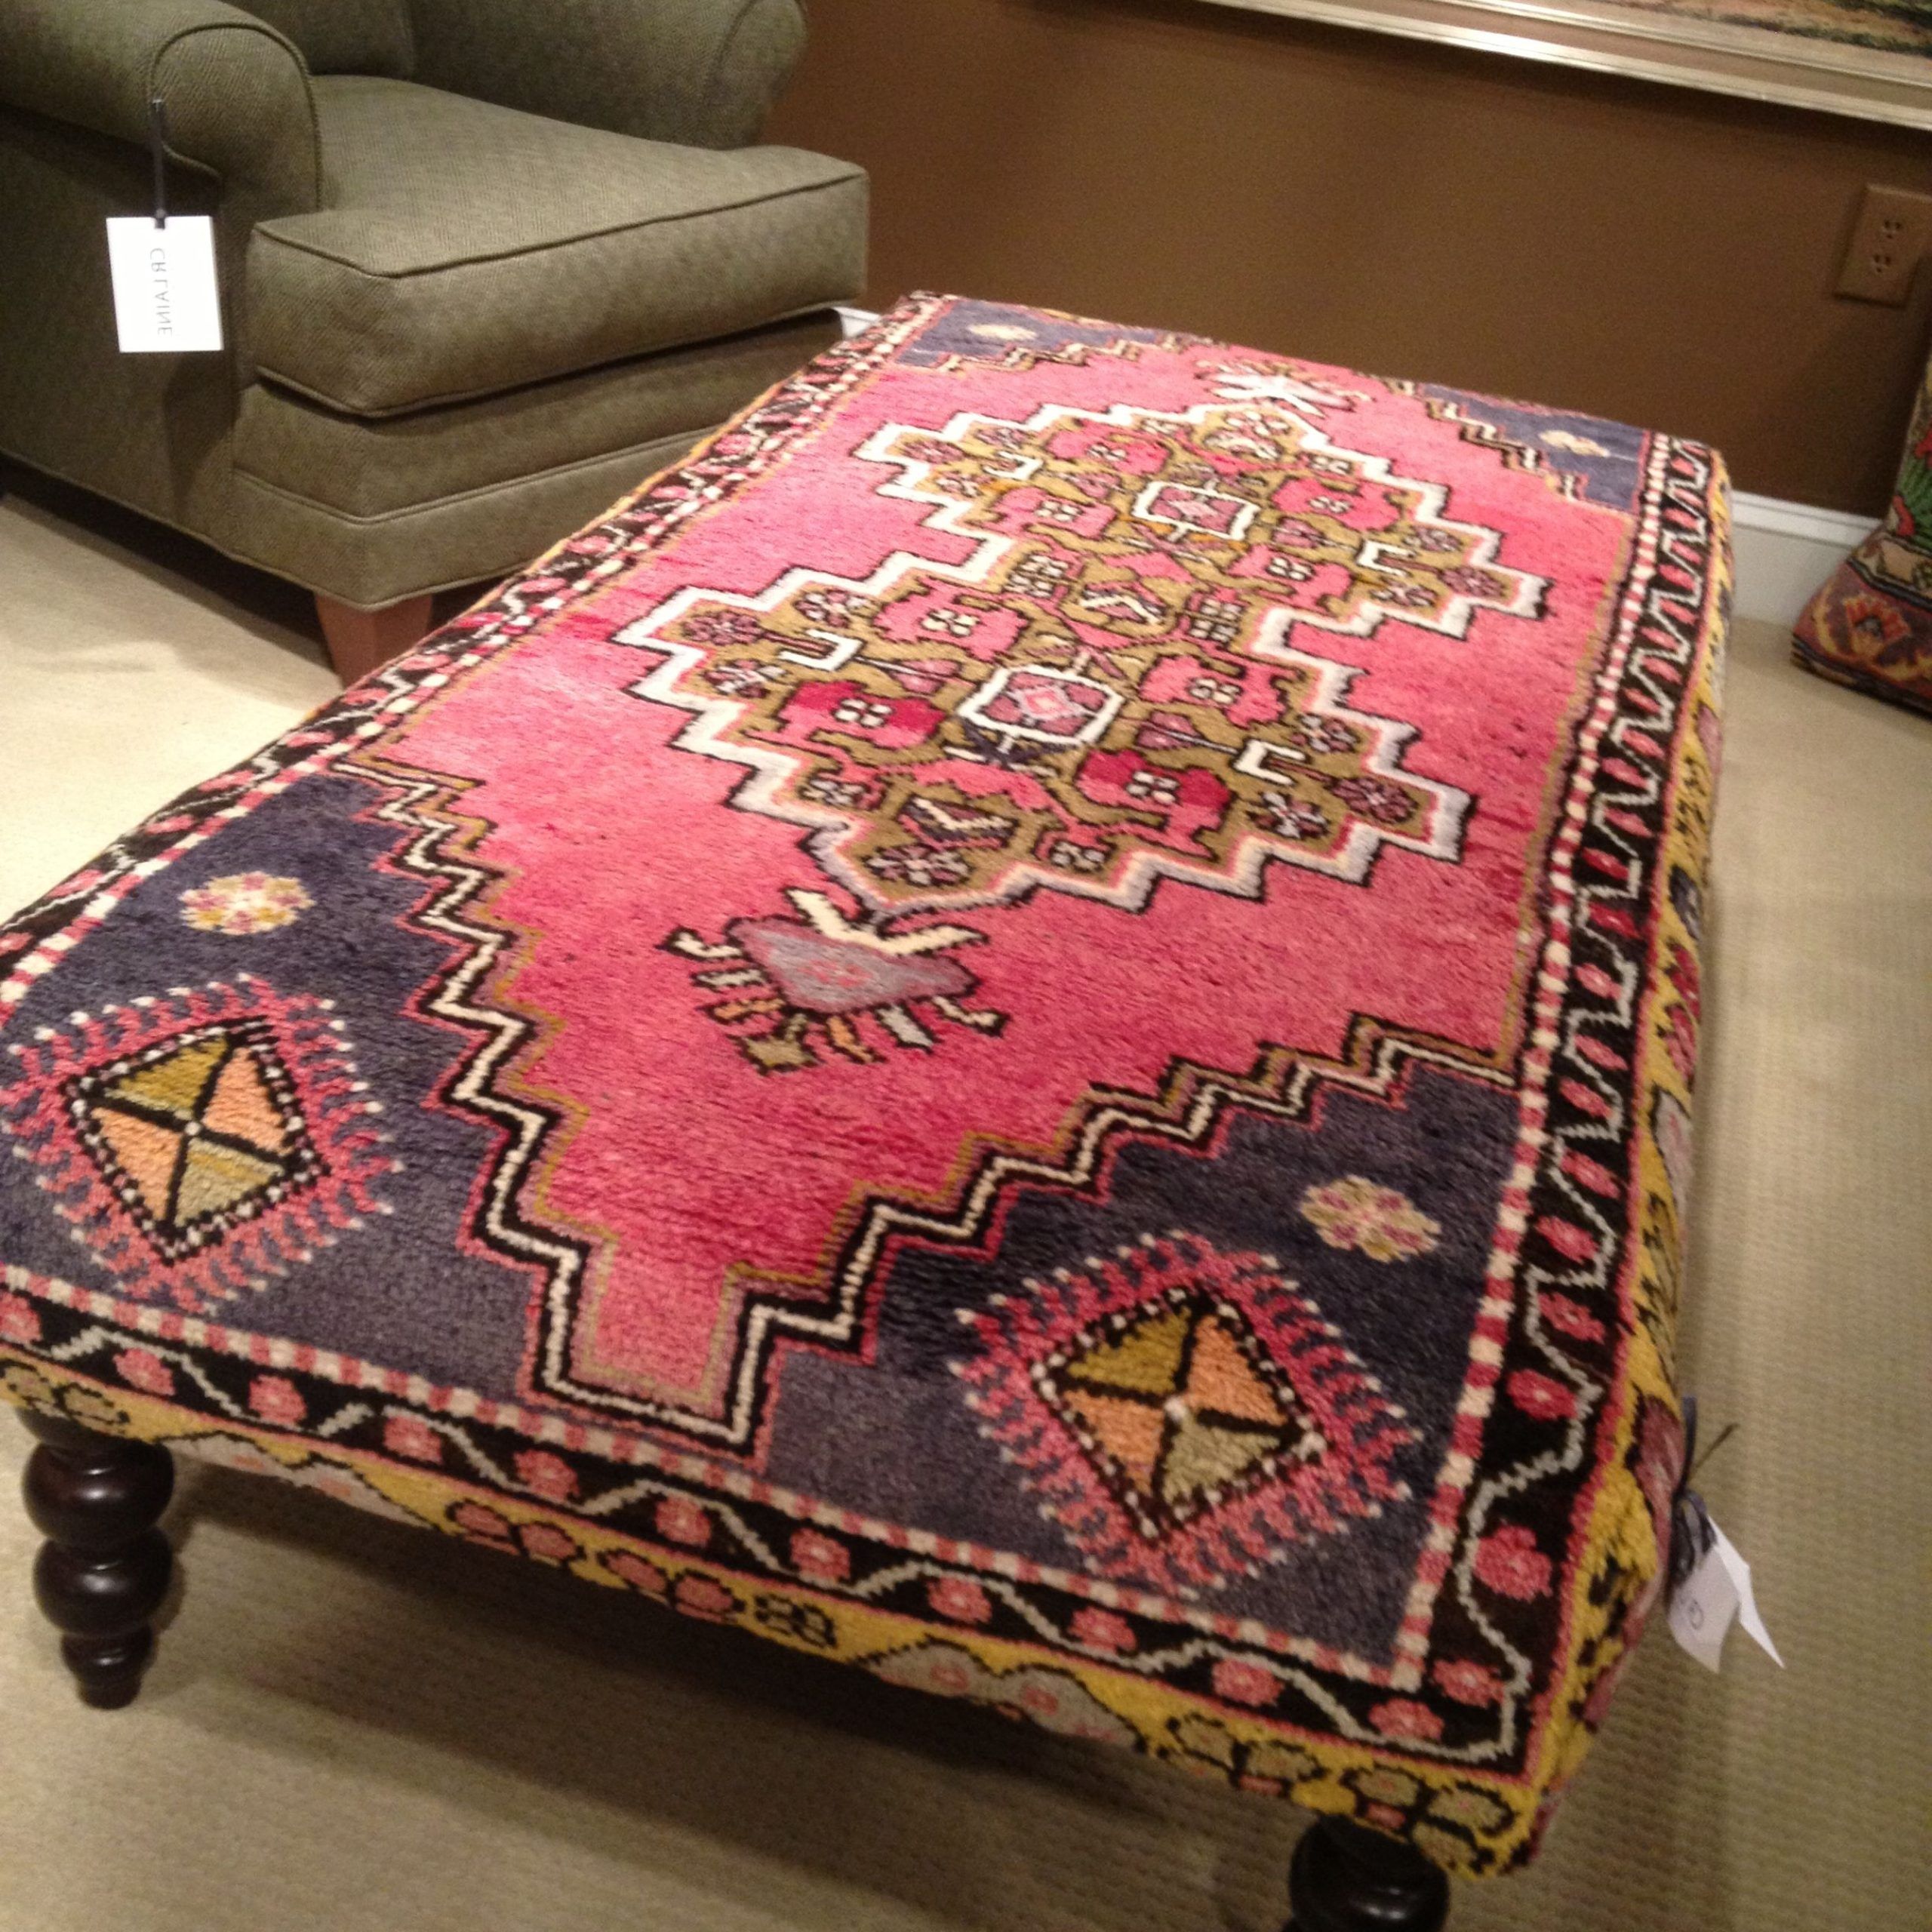 2019 Upholstered Ottomans Within Rug Upholstered Ottoman (View 10 of 15)